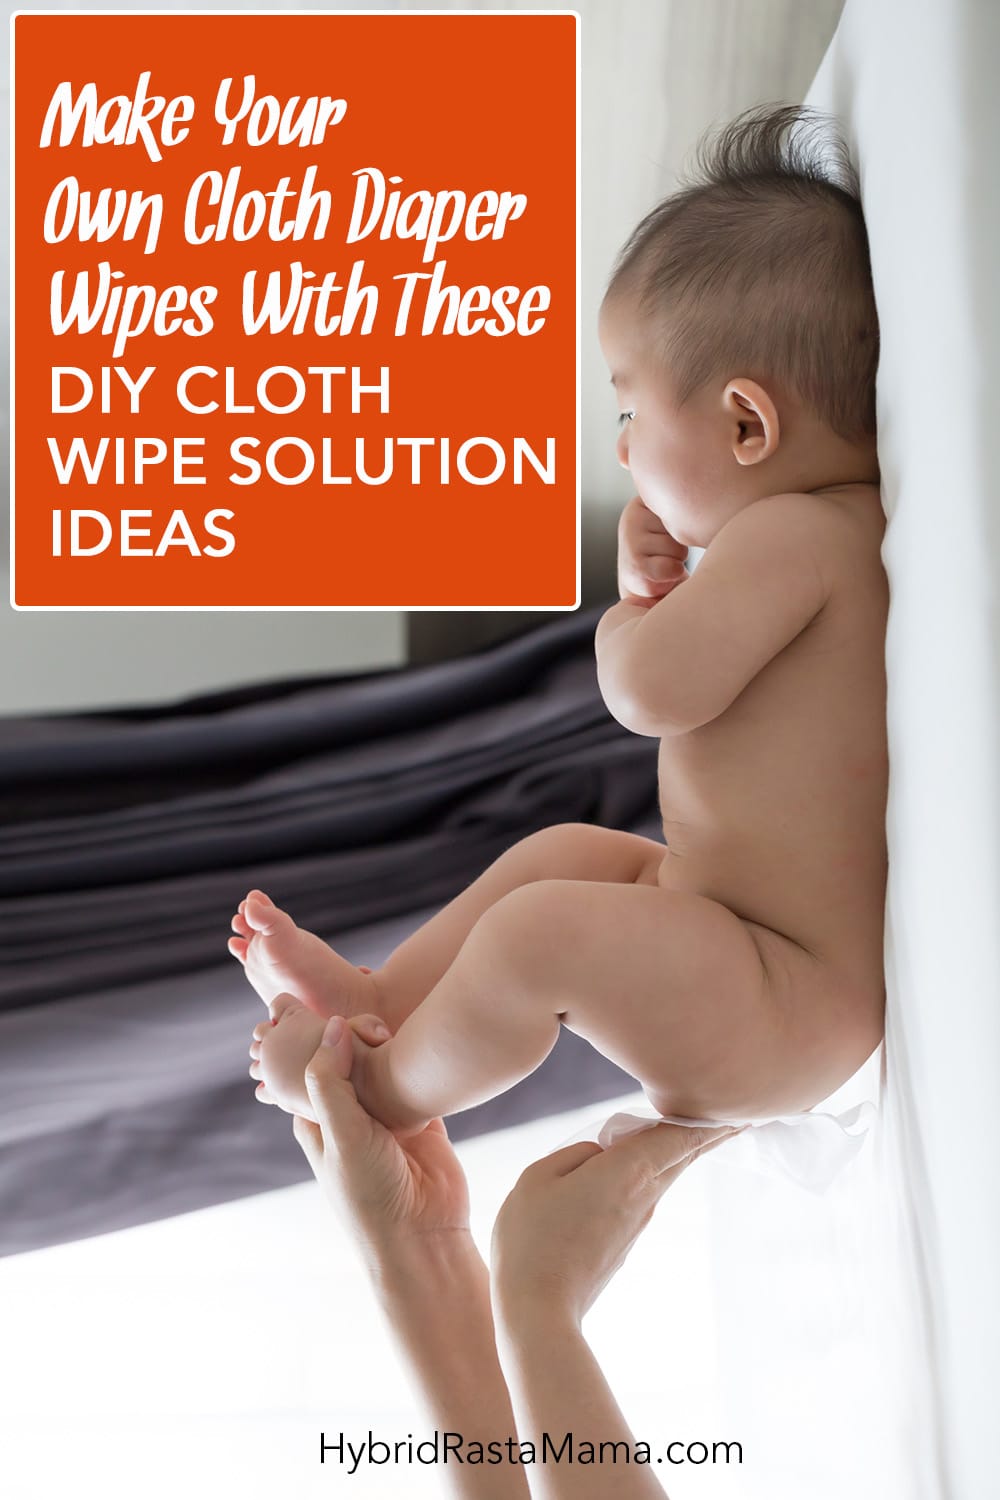 Mother wipe the bottom and the body baby with homemade cloth diaper wipes solution after bath